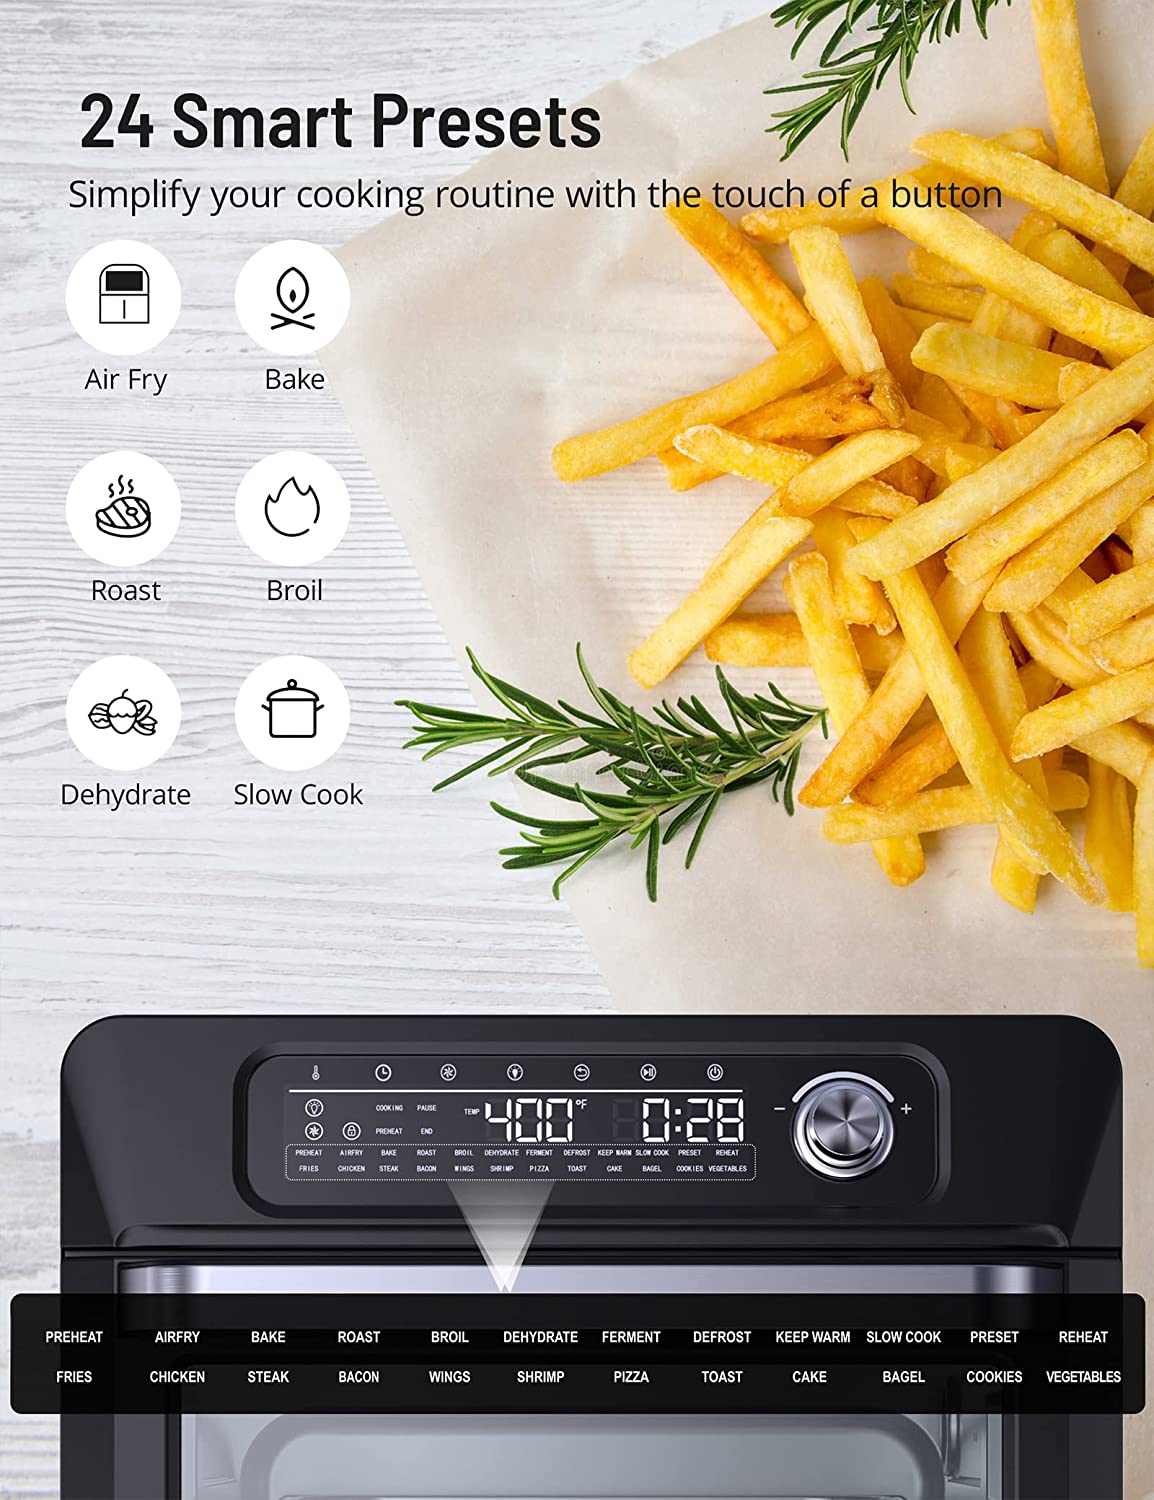 oven with built in air fryer